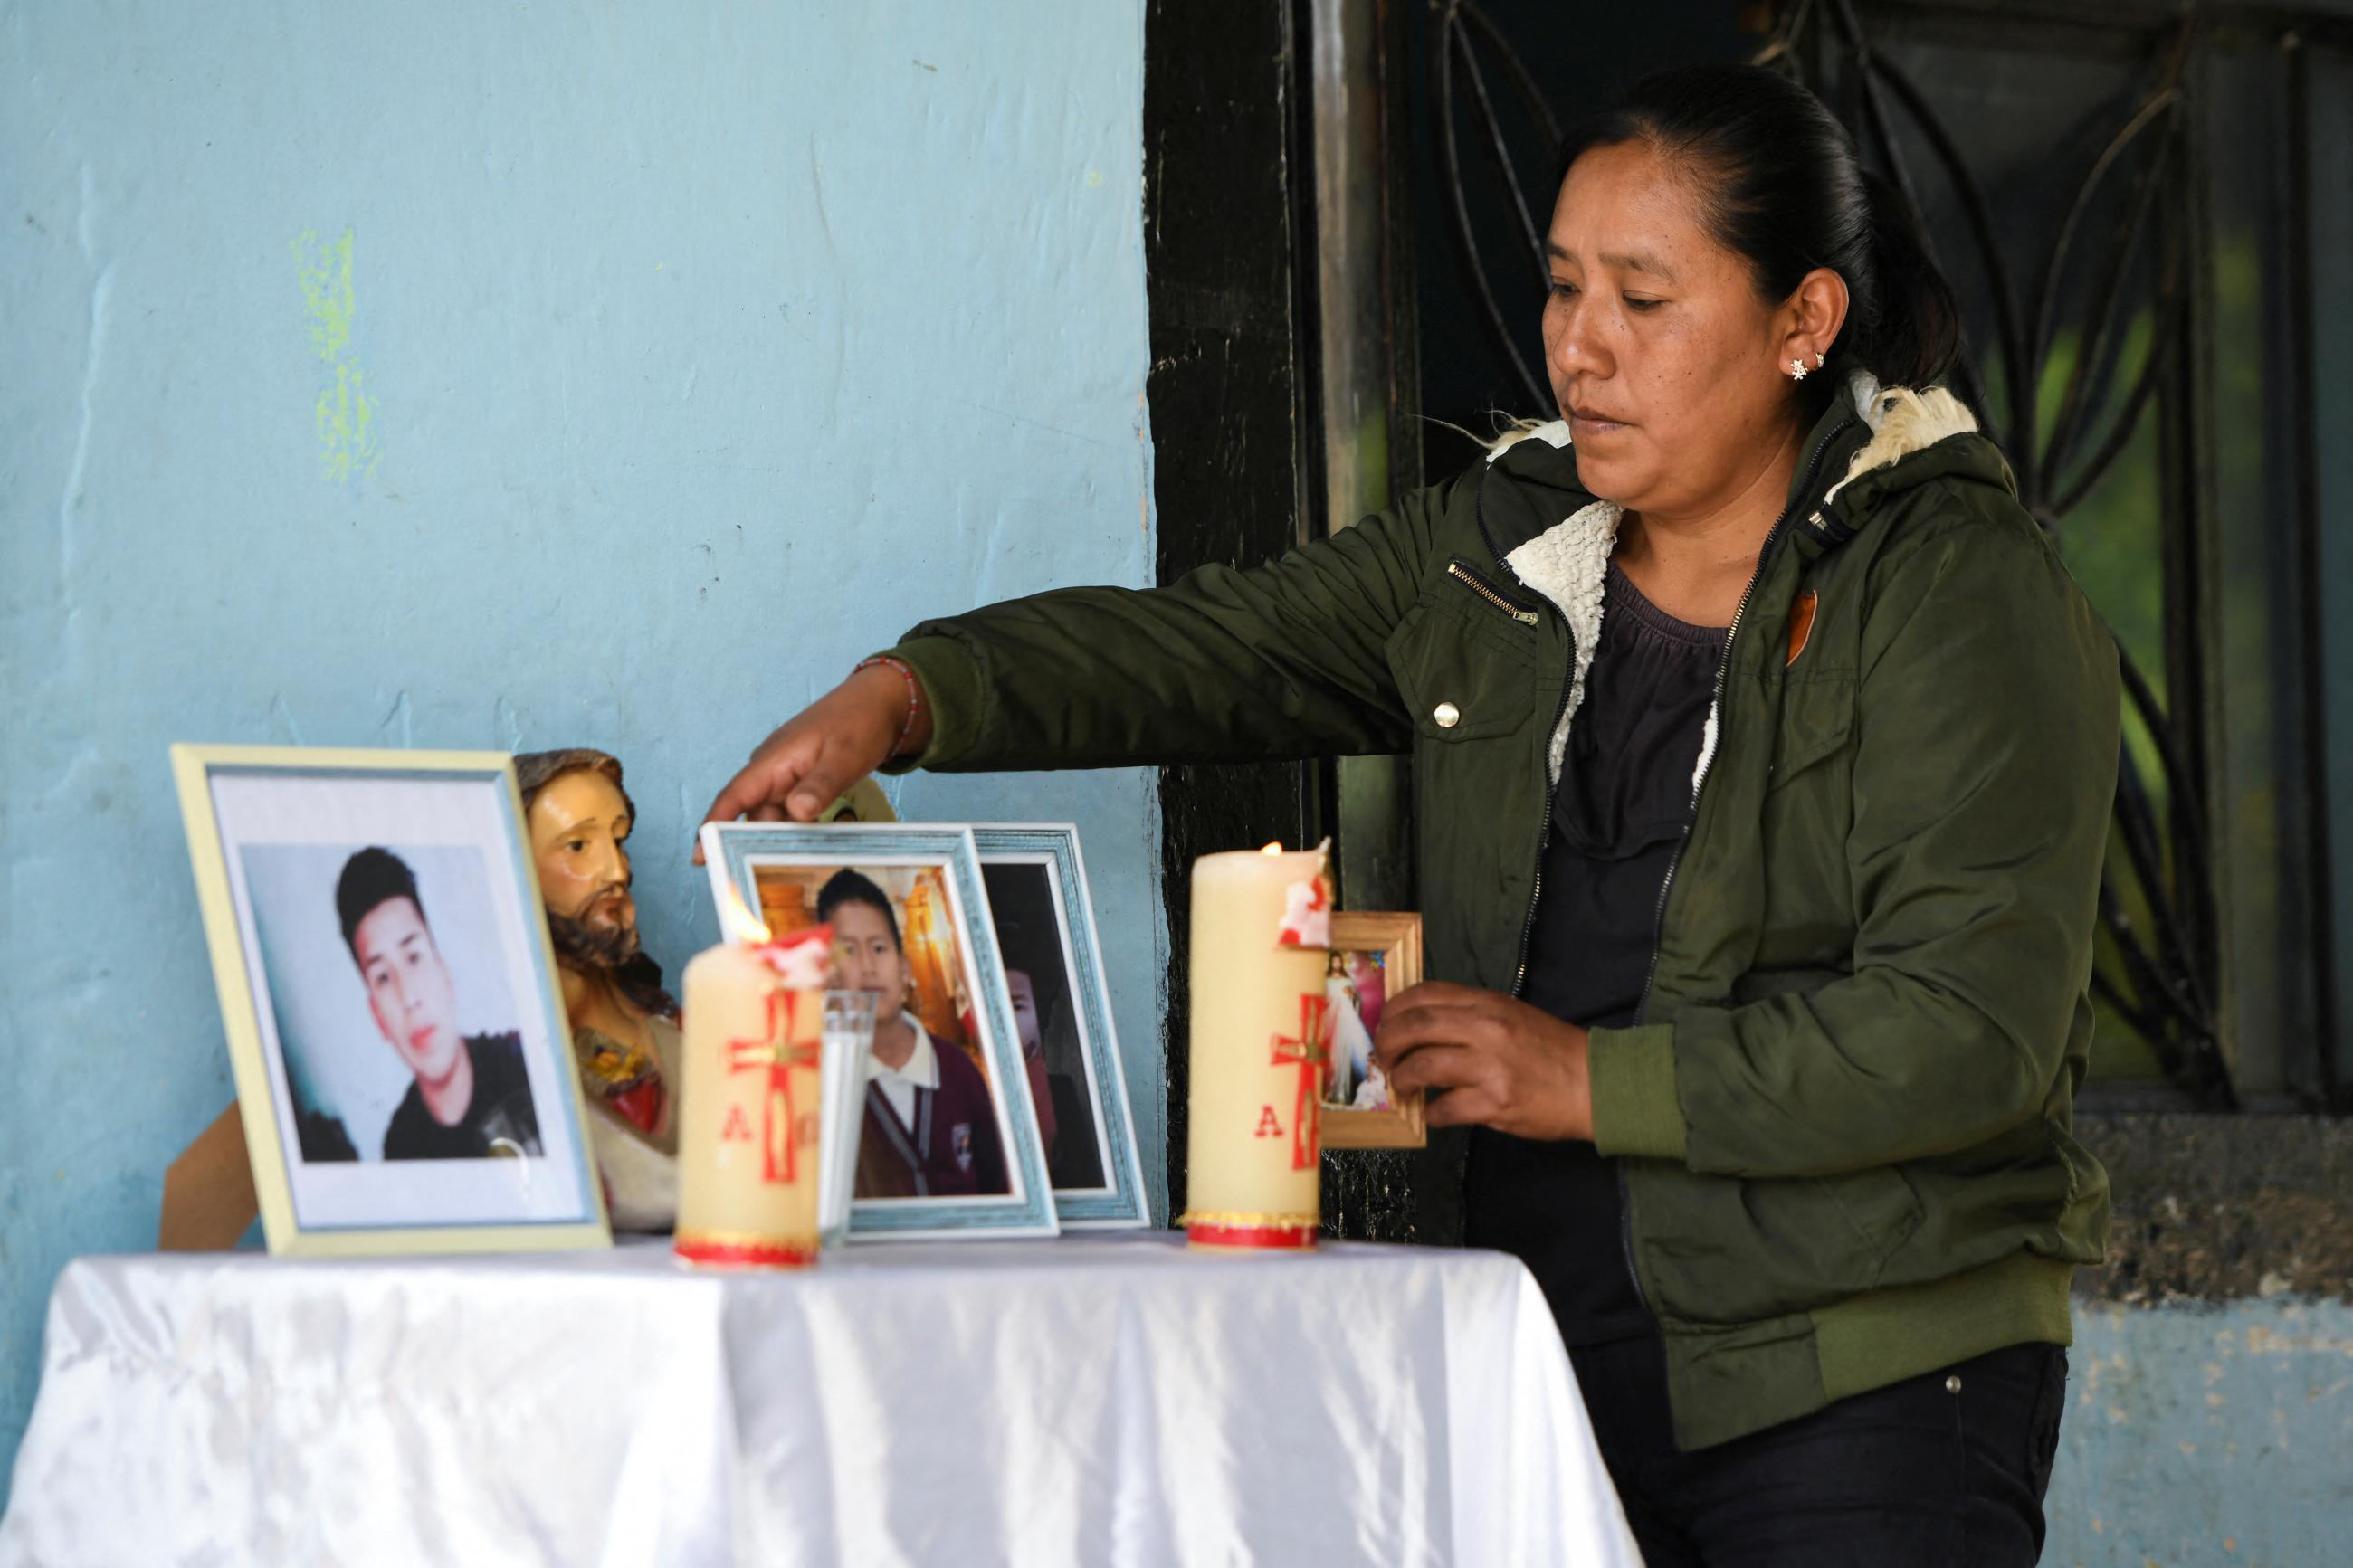 Yolanda Olivares, arranges pictures of her sons Jair, 19, Yovani, 16, and nephew Misael Olivares, 16, who died in a truck while migrating to the U.S. 